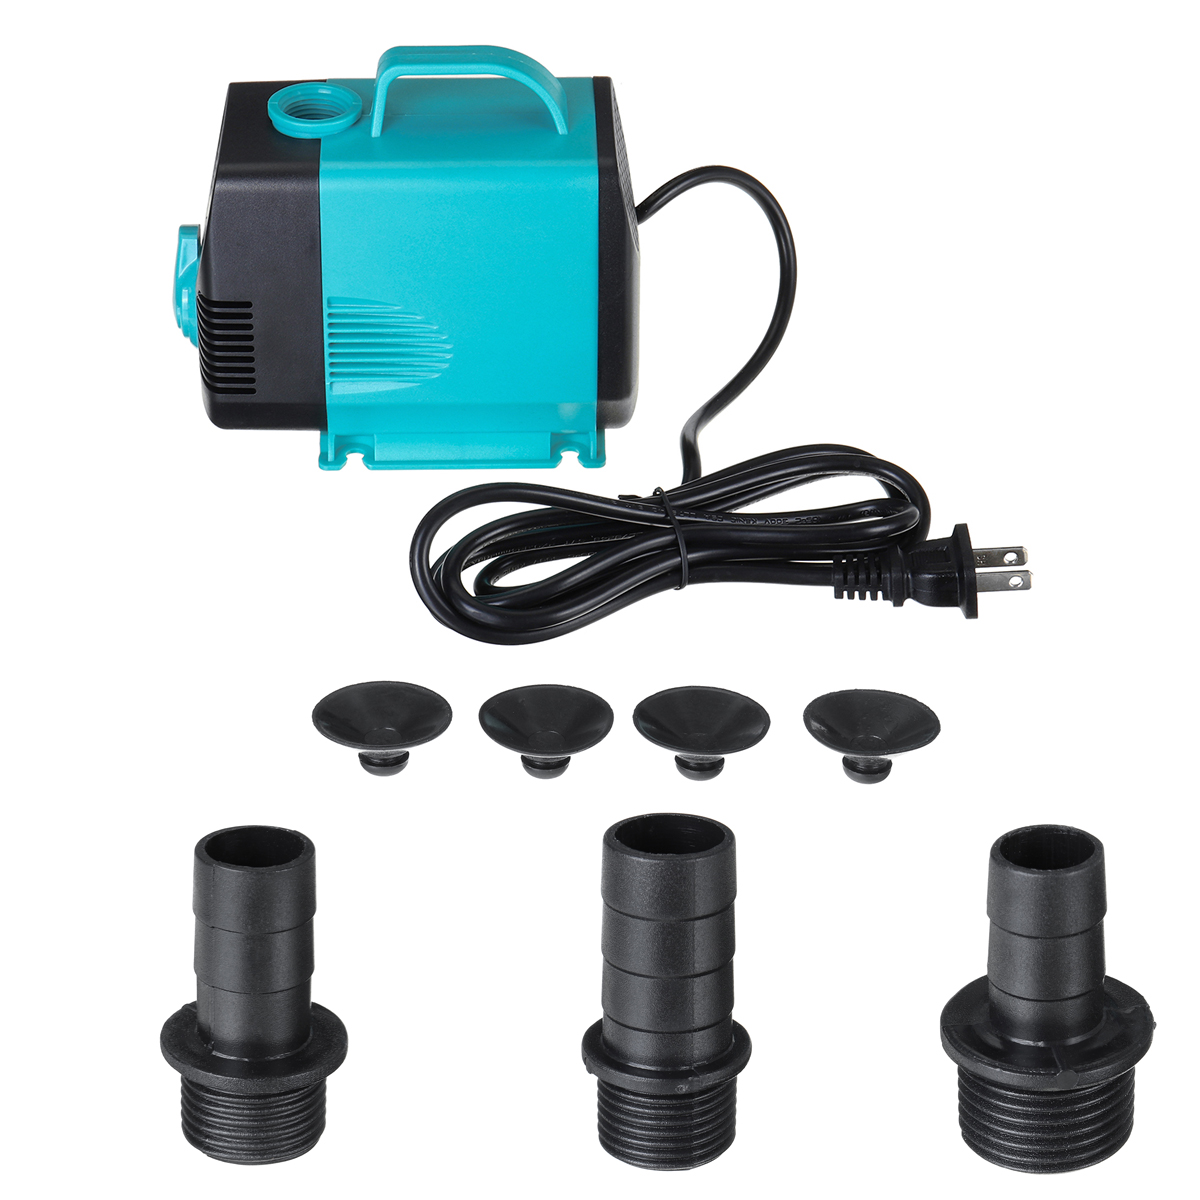 110V-60HZ-Submersible-Pump-600-3000LH-200cm-Ultra-quiet-Water-Pump-Fountain-Pump-with-Power-Cord-For-1634555-7